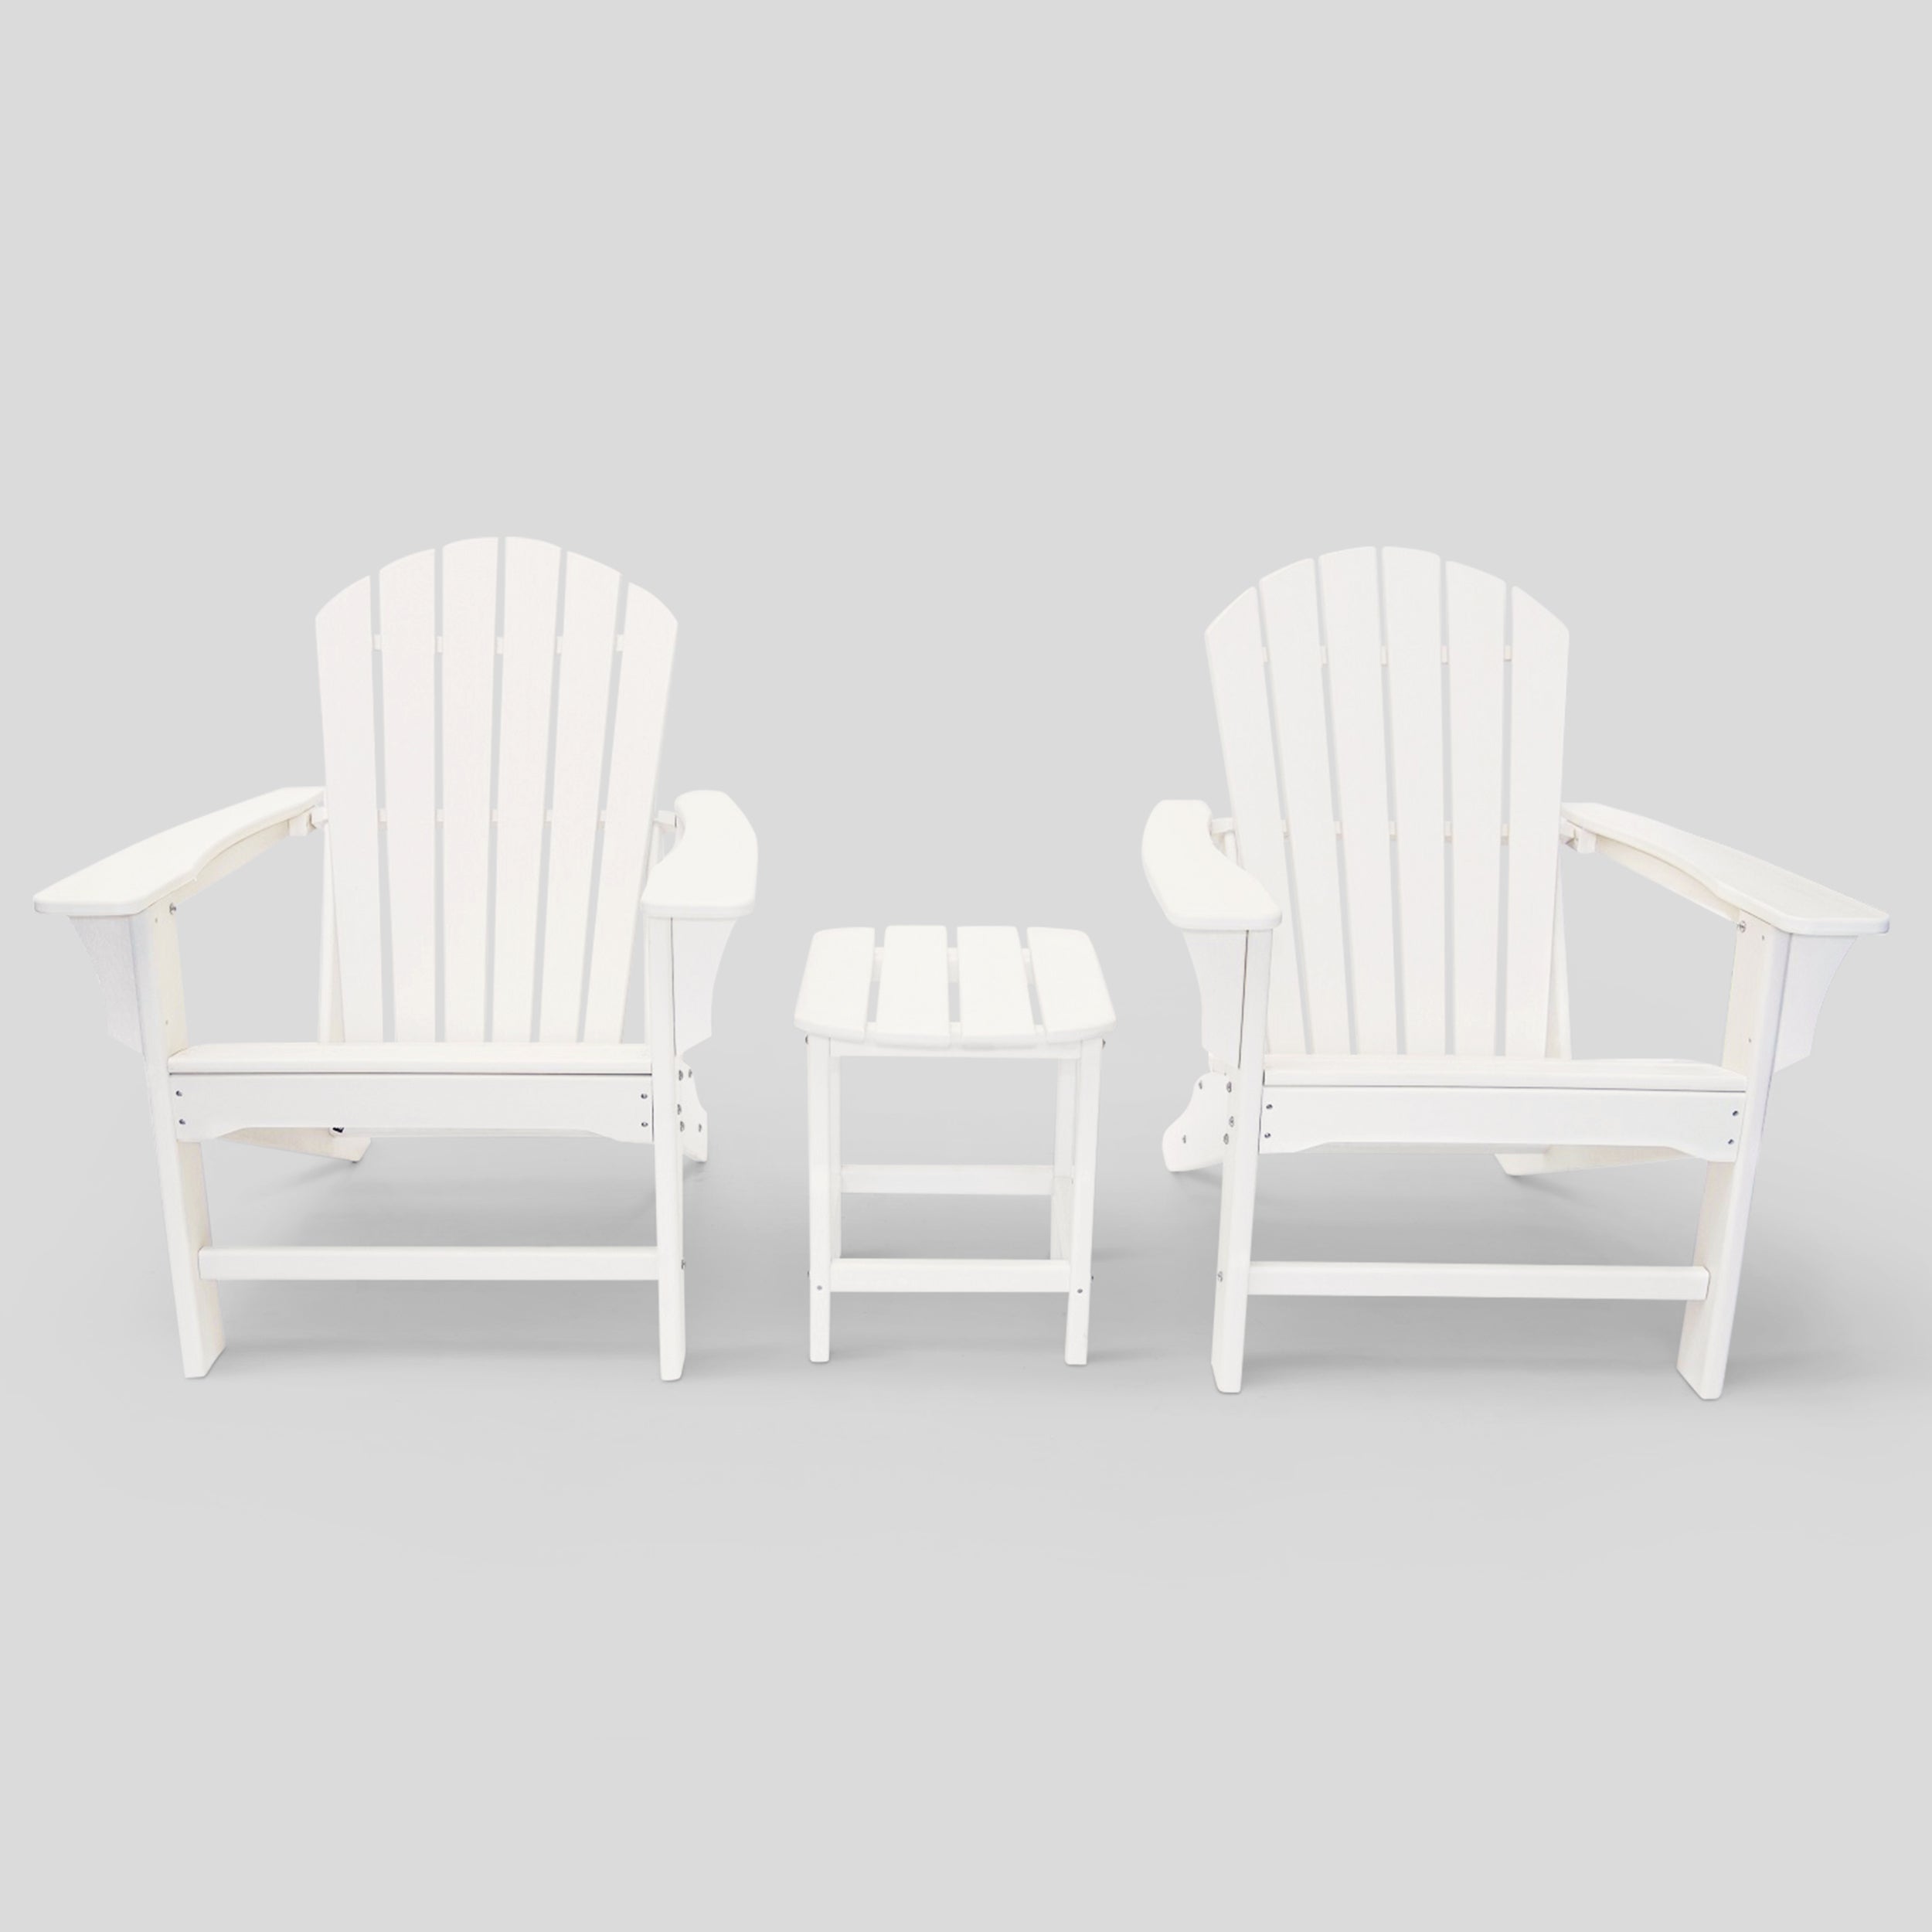 LuXeo Hampton  Outdoor Patio Adirondack Chairs and Table Set (3-Piece)